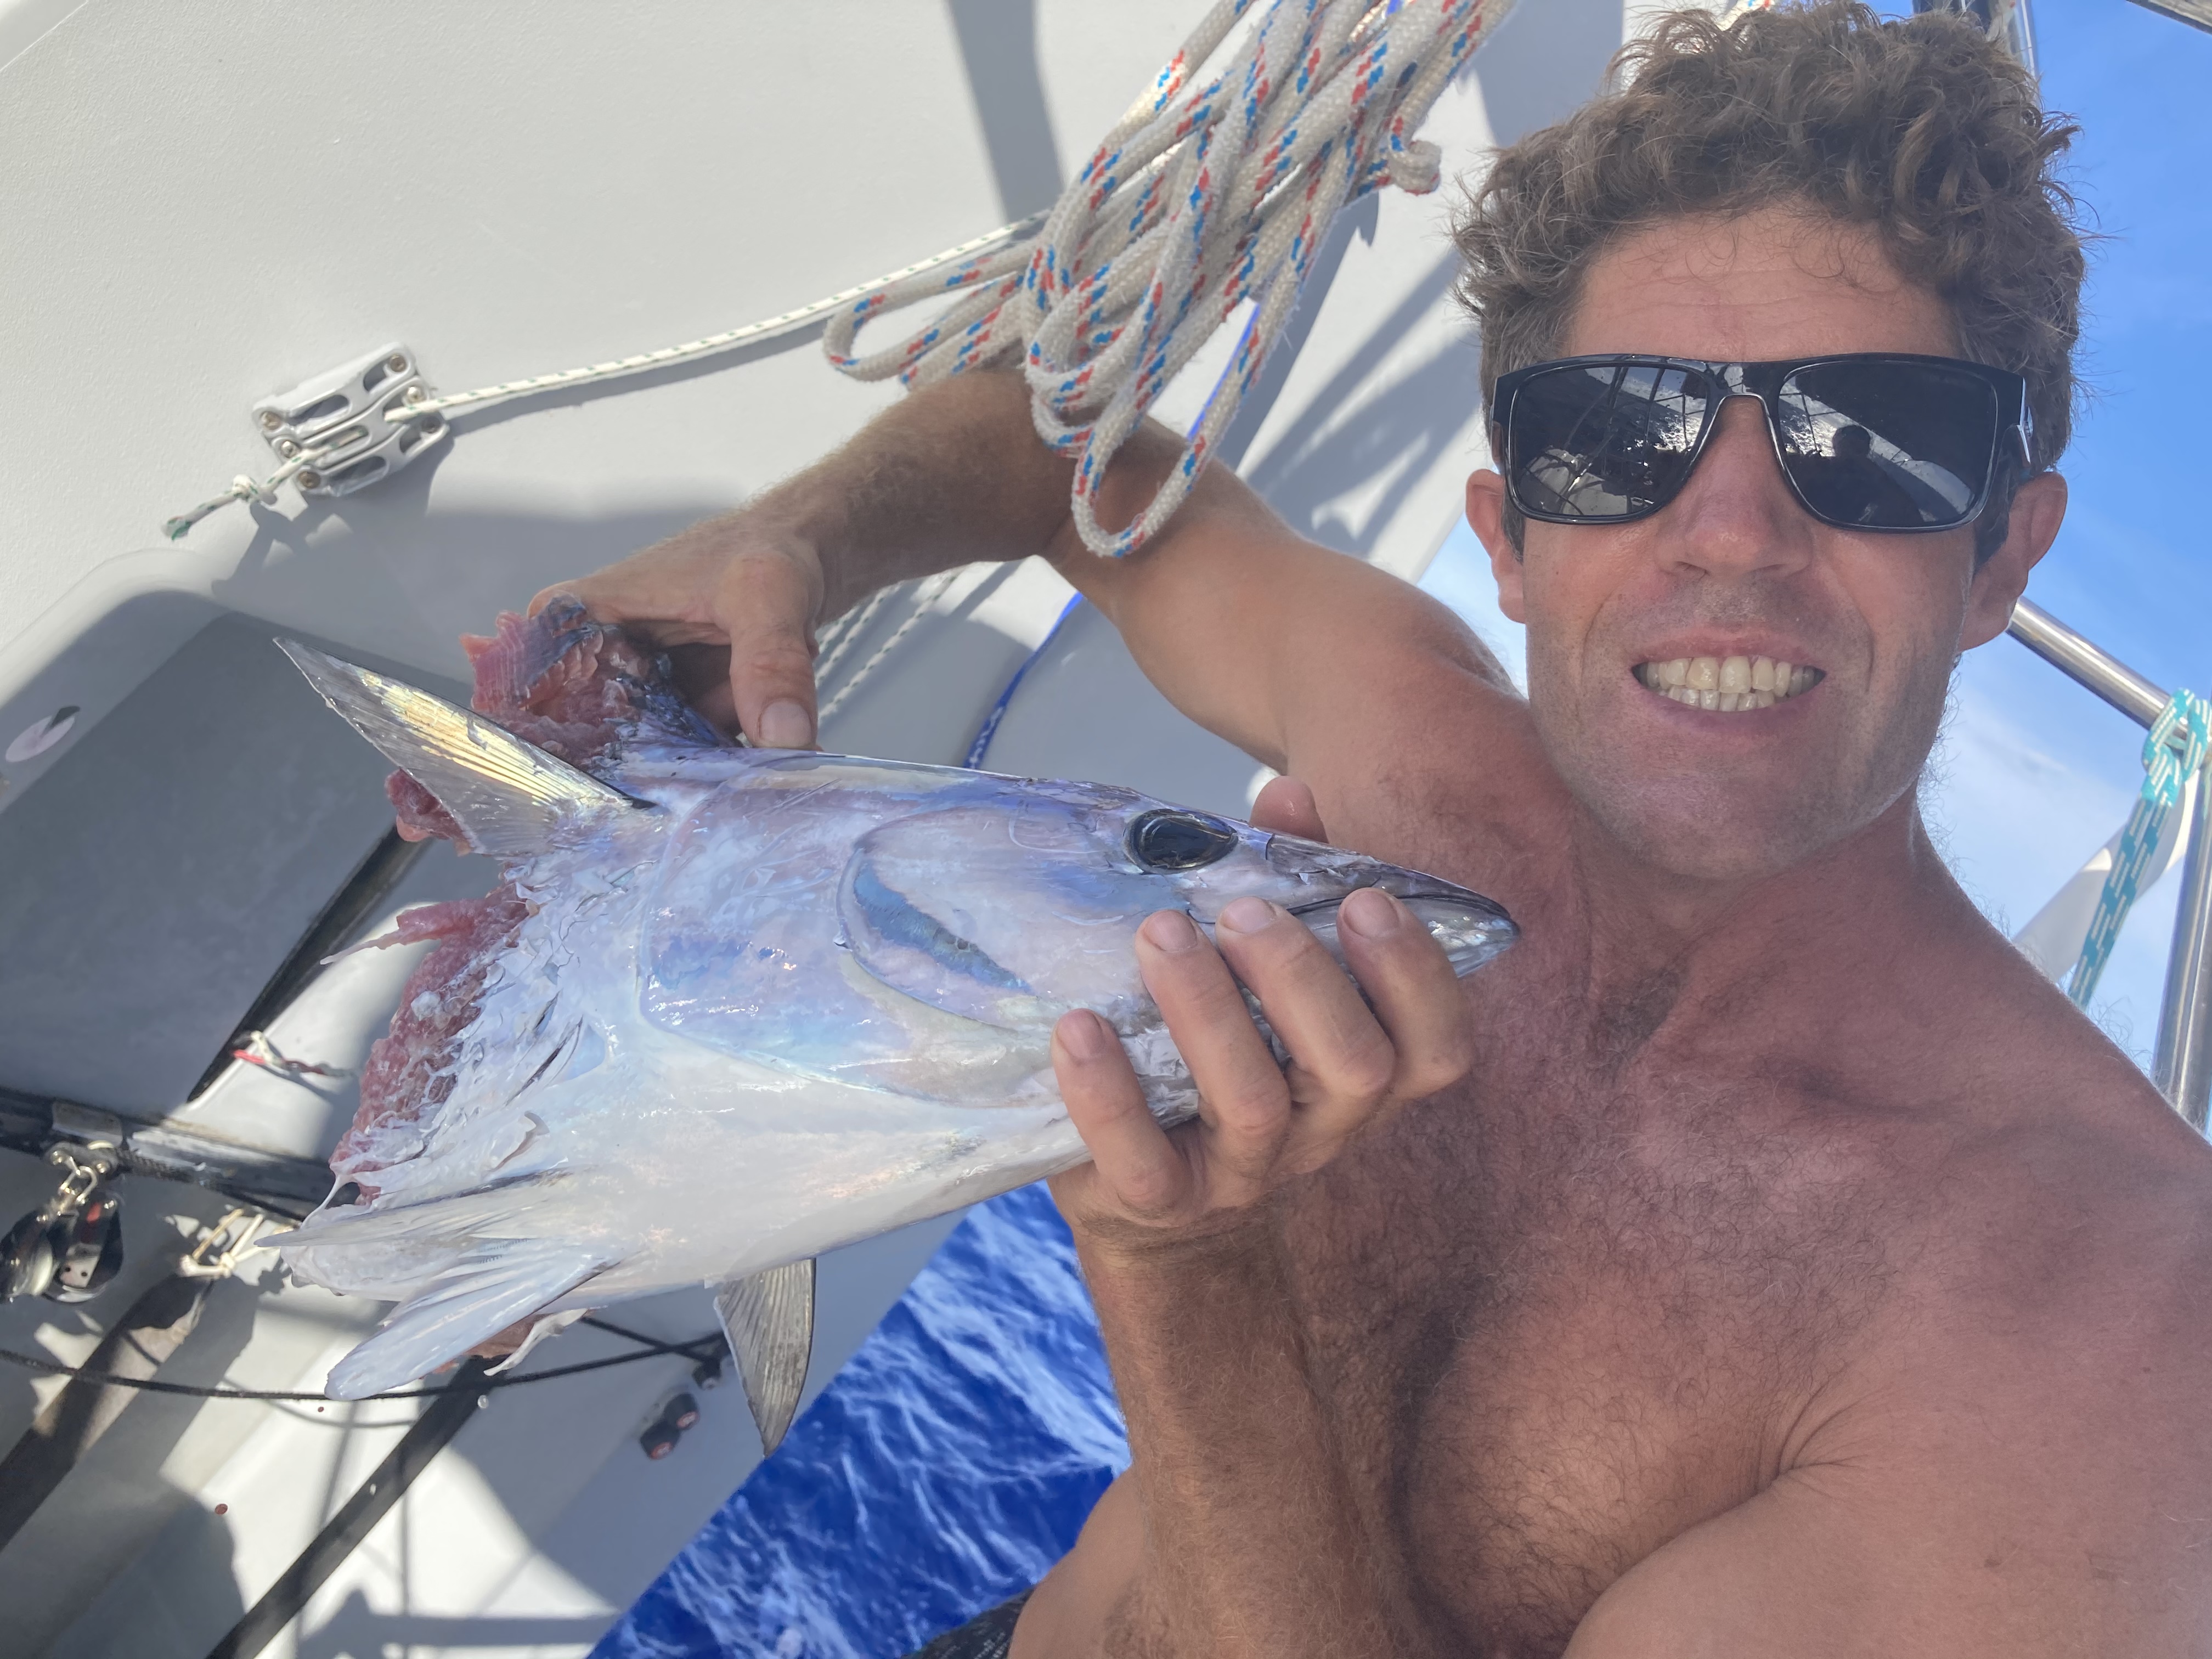 That must have been a big shark! Only reeling in a large tuna head after a strike outside of Amanu - Hmmm there are some big ones lurking round here!